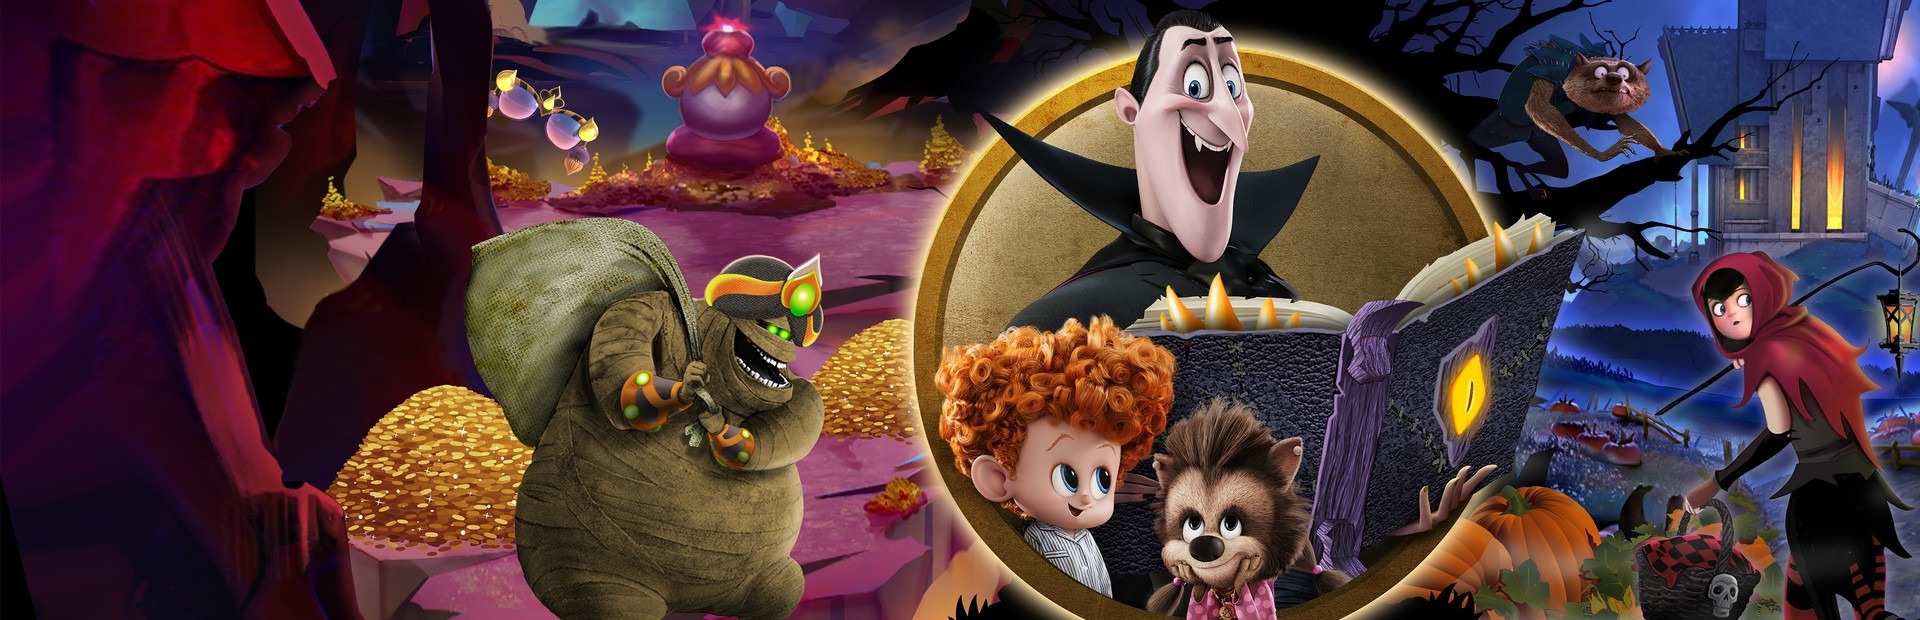 Scary tale. Hotel Transylvania: Scary-Tale Adventures.